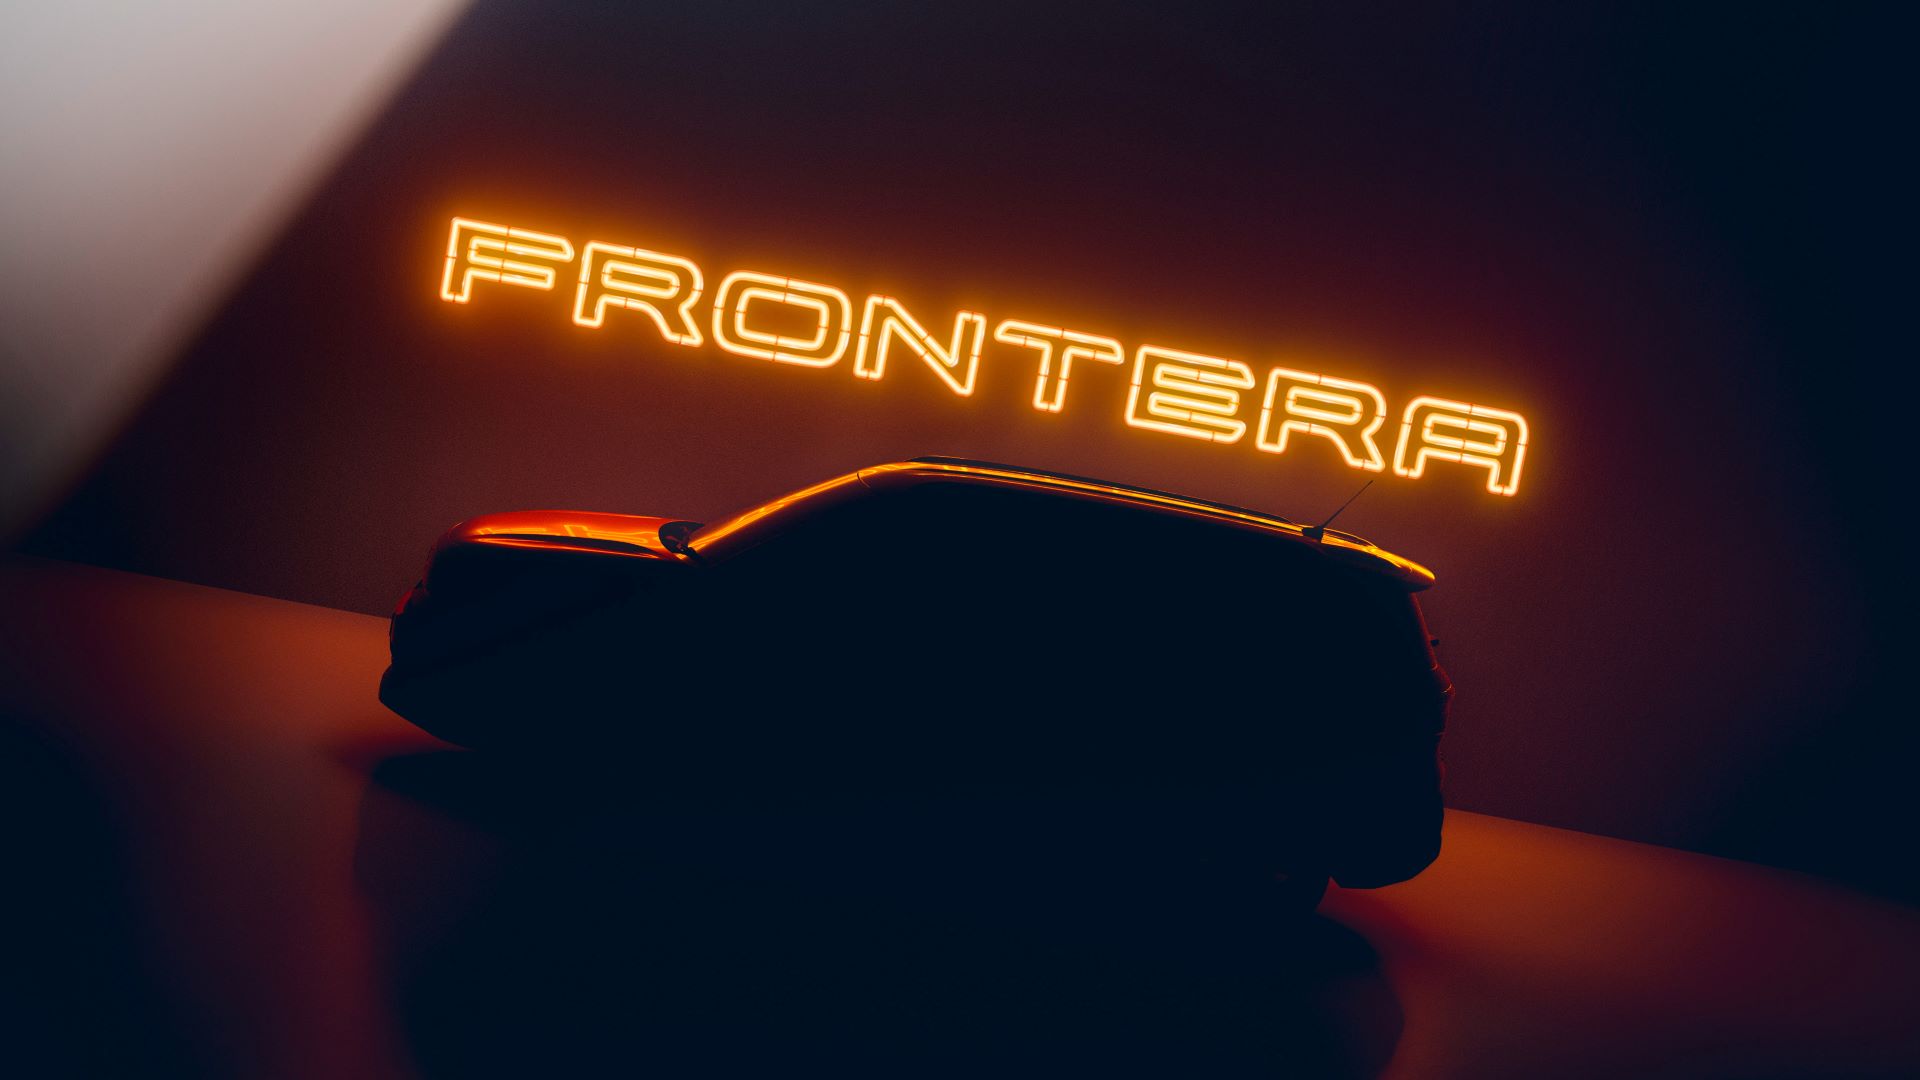 All-New Electric Opel SUV will be Named Frontera